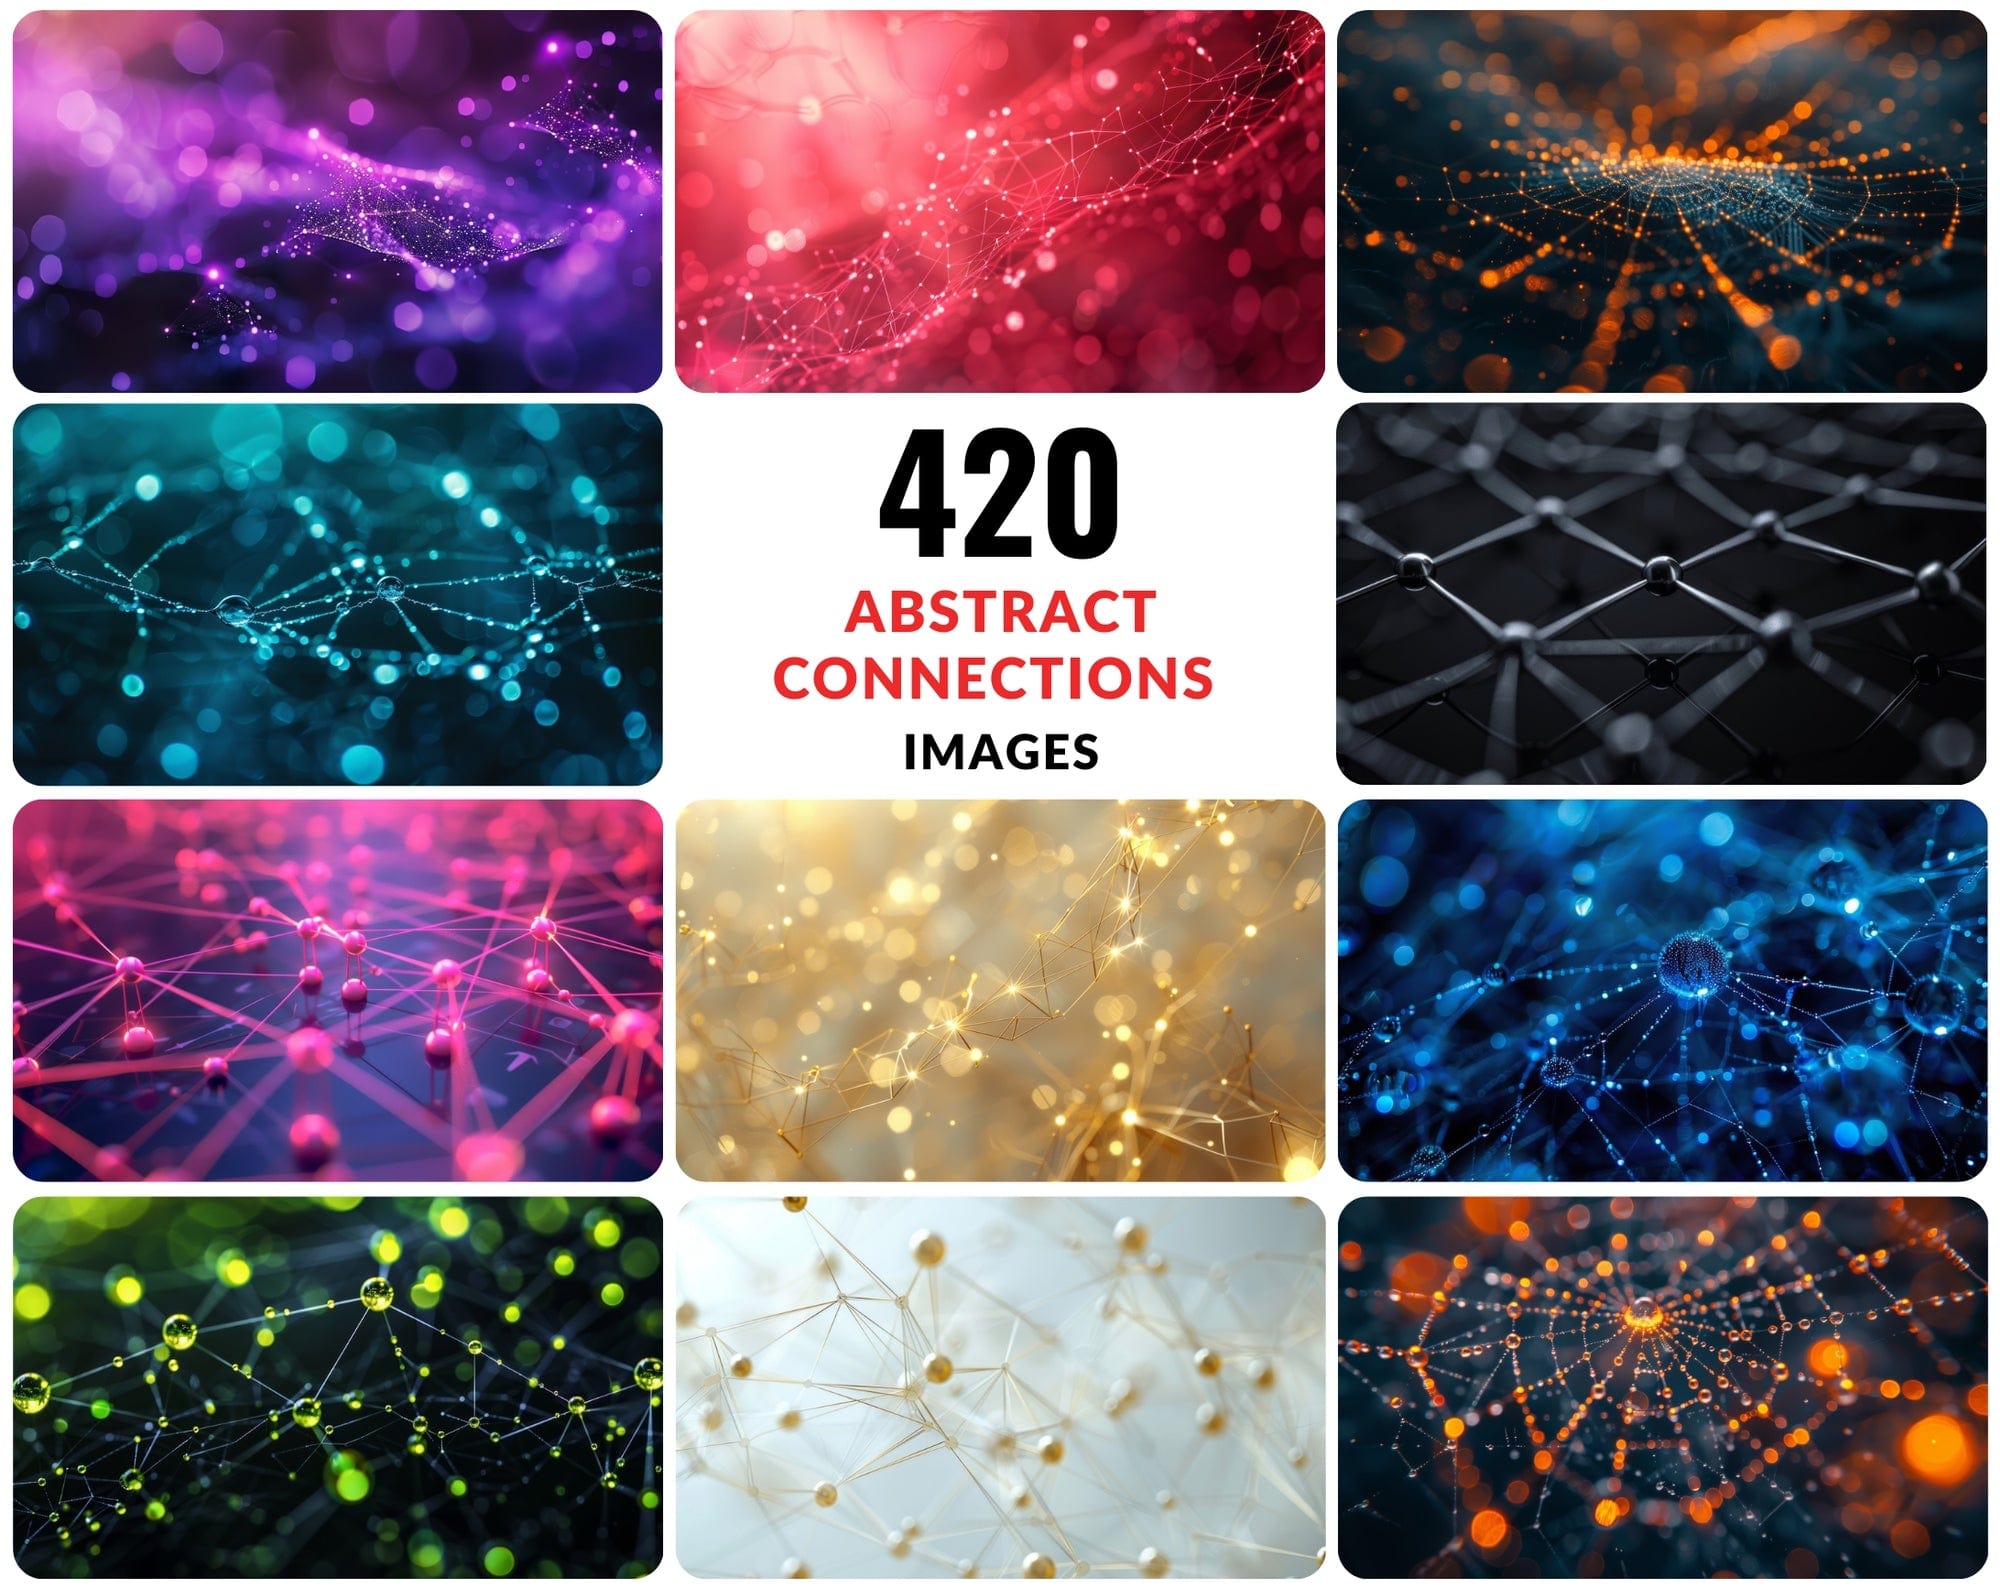 420 Images: Luminous Grids - The Beauty of Abstract Connections Digital Download Sumobundle